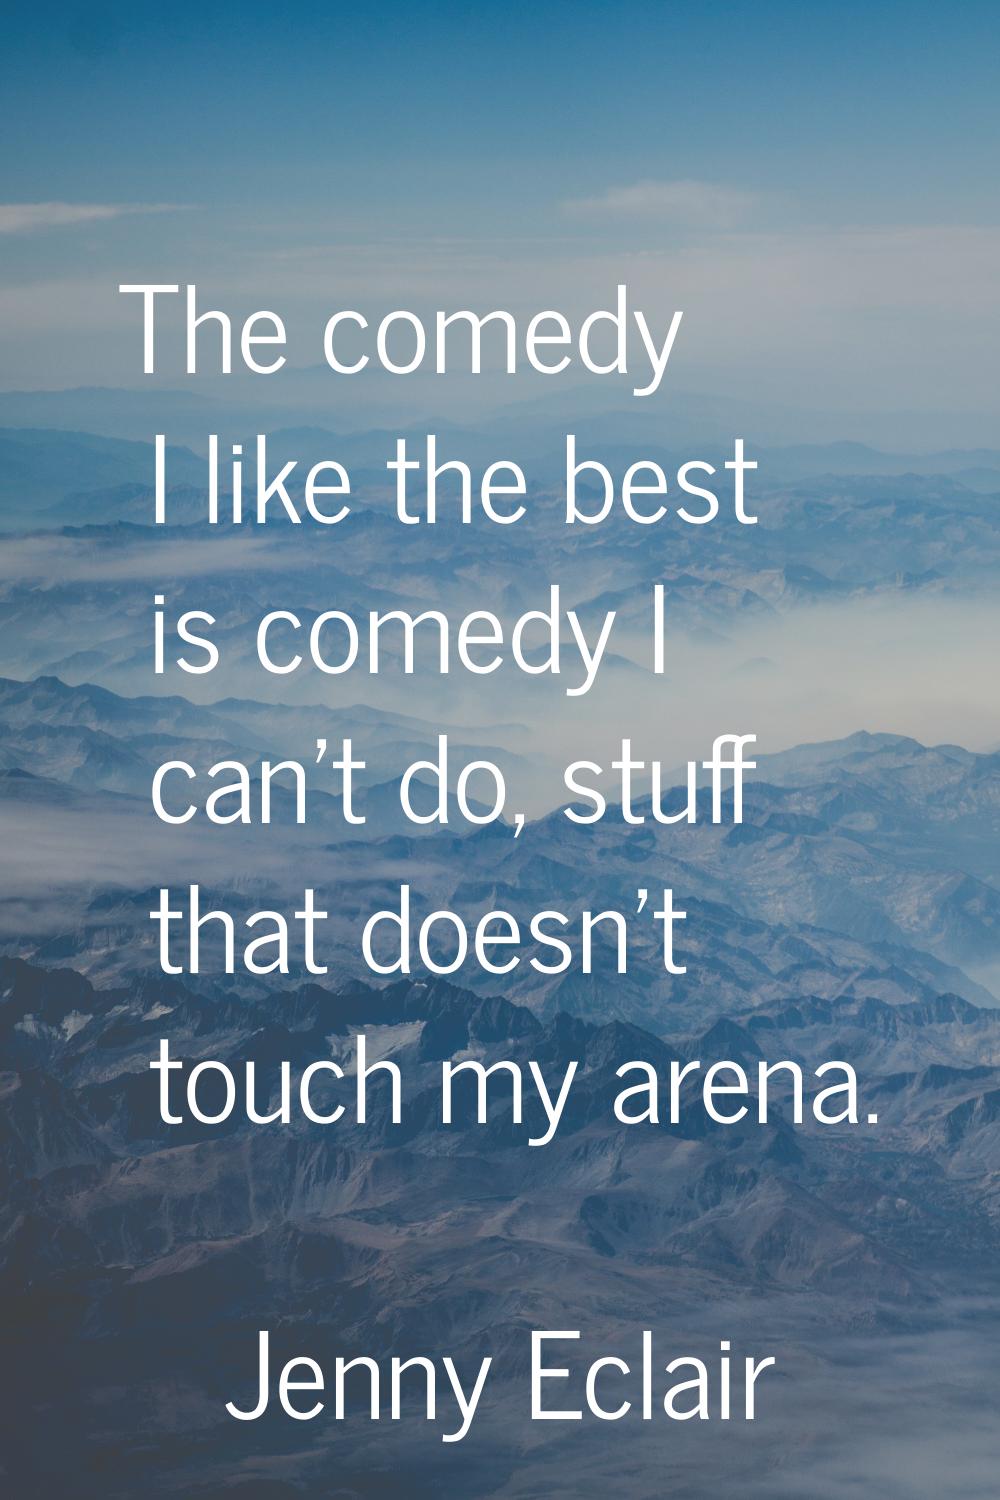 The comedy I like the best is comedy I can't do, stuff that doesn't touch my arena.